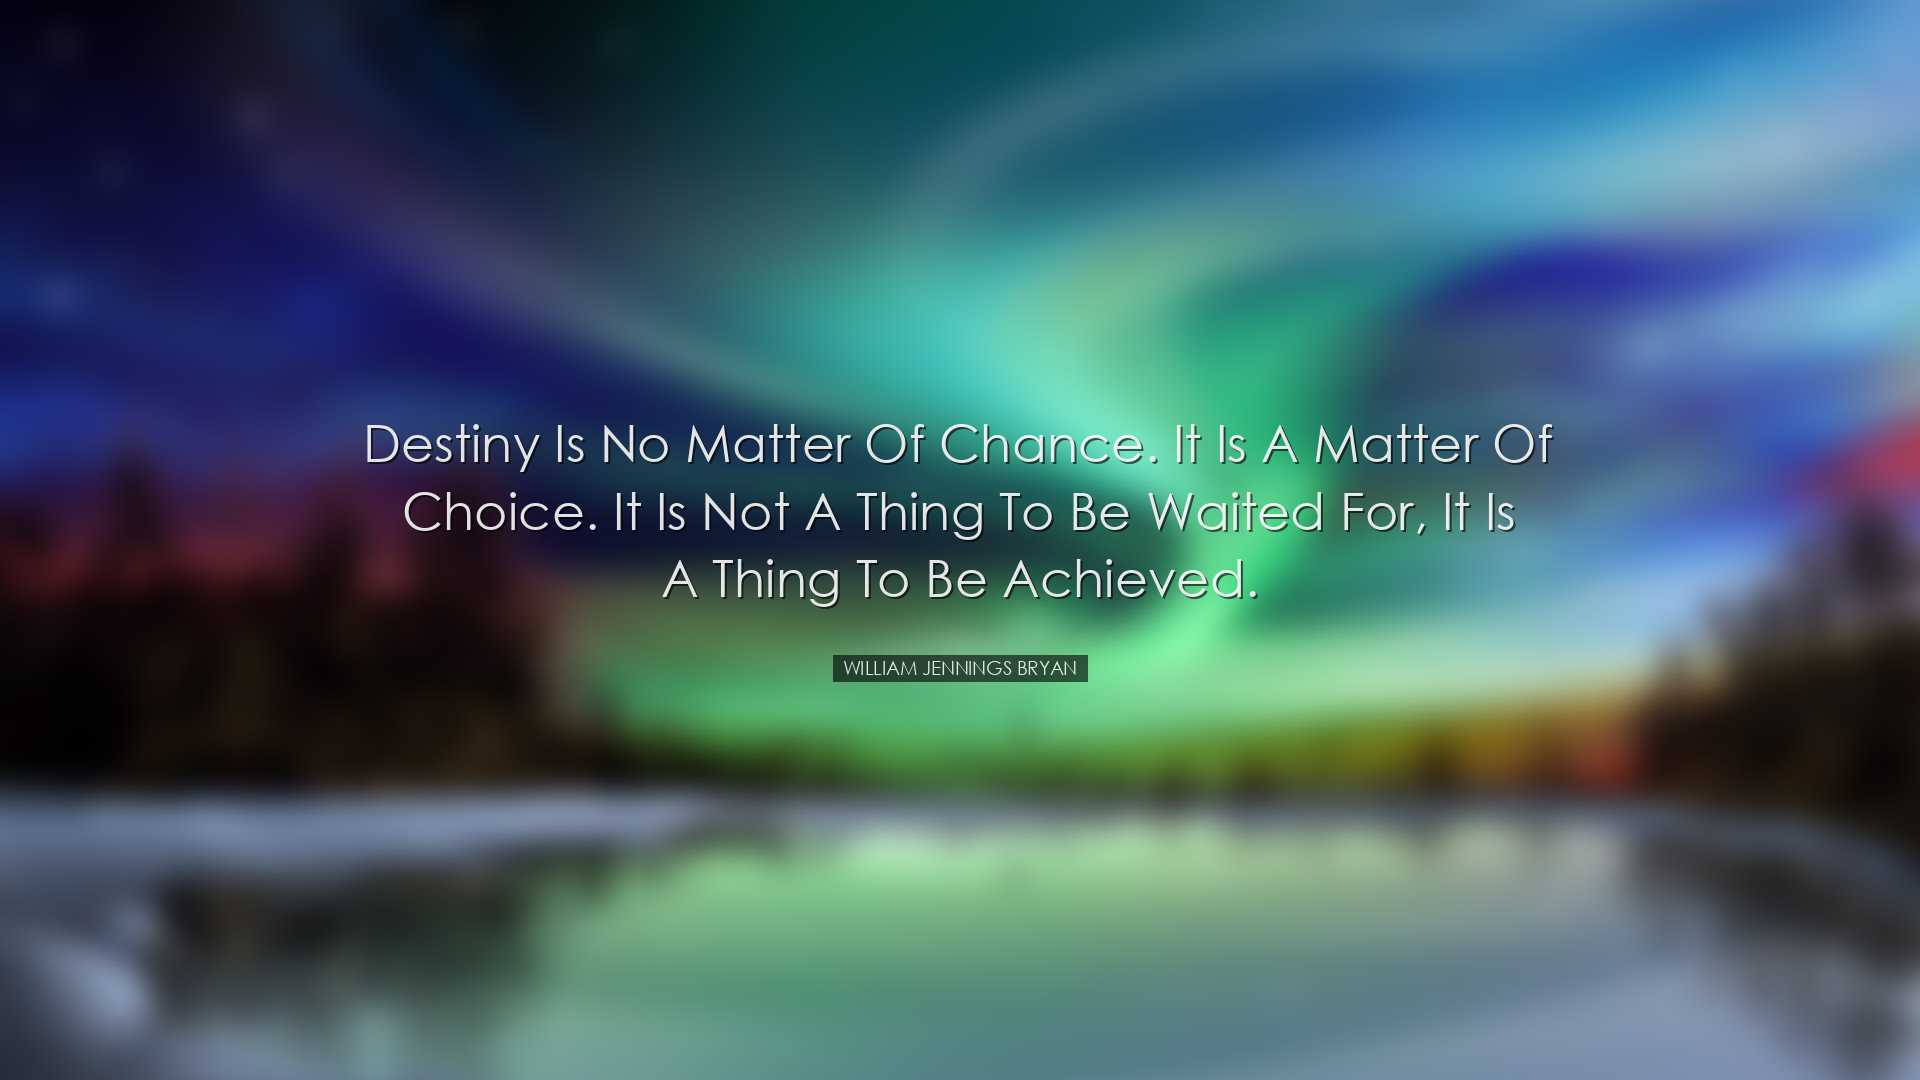 Destiny is no matter of chance. It is a matter of choice. It is no